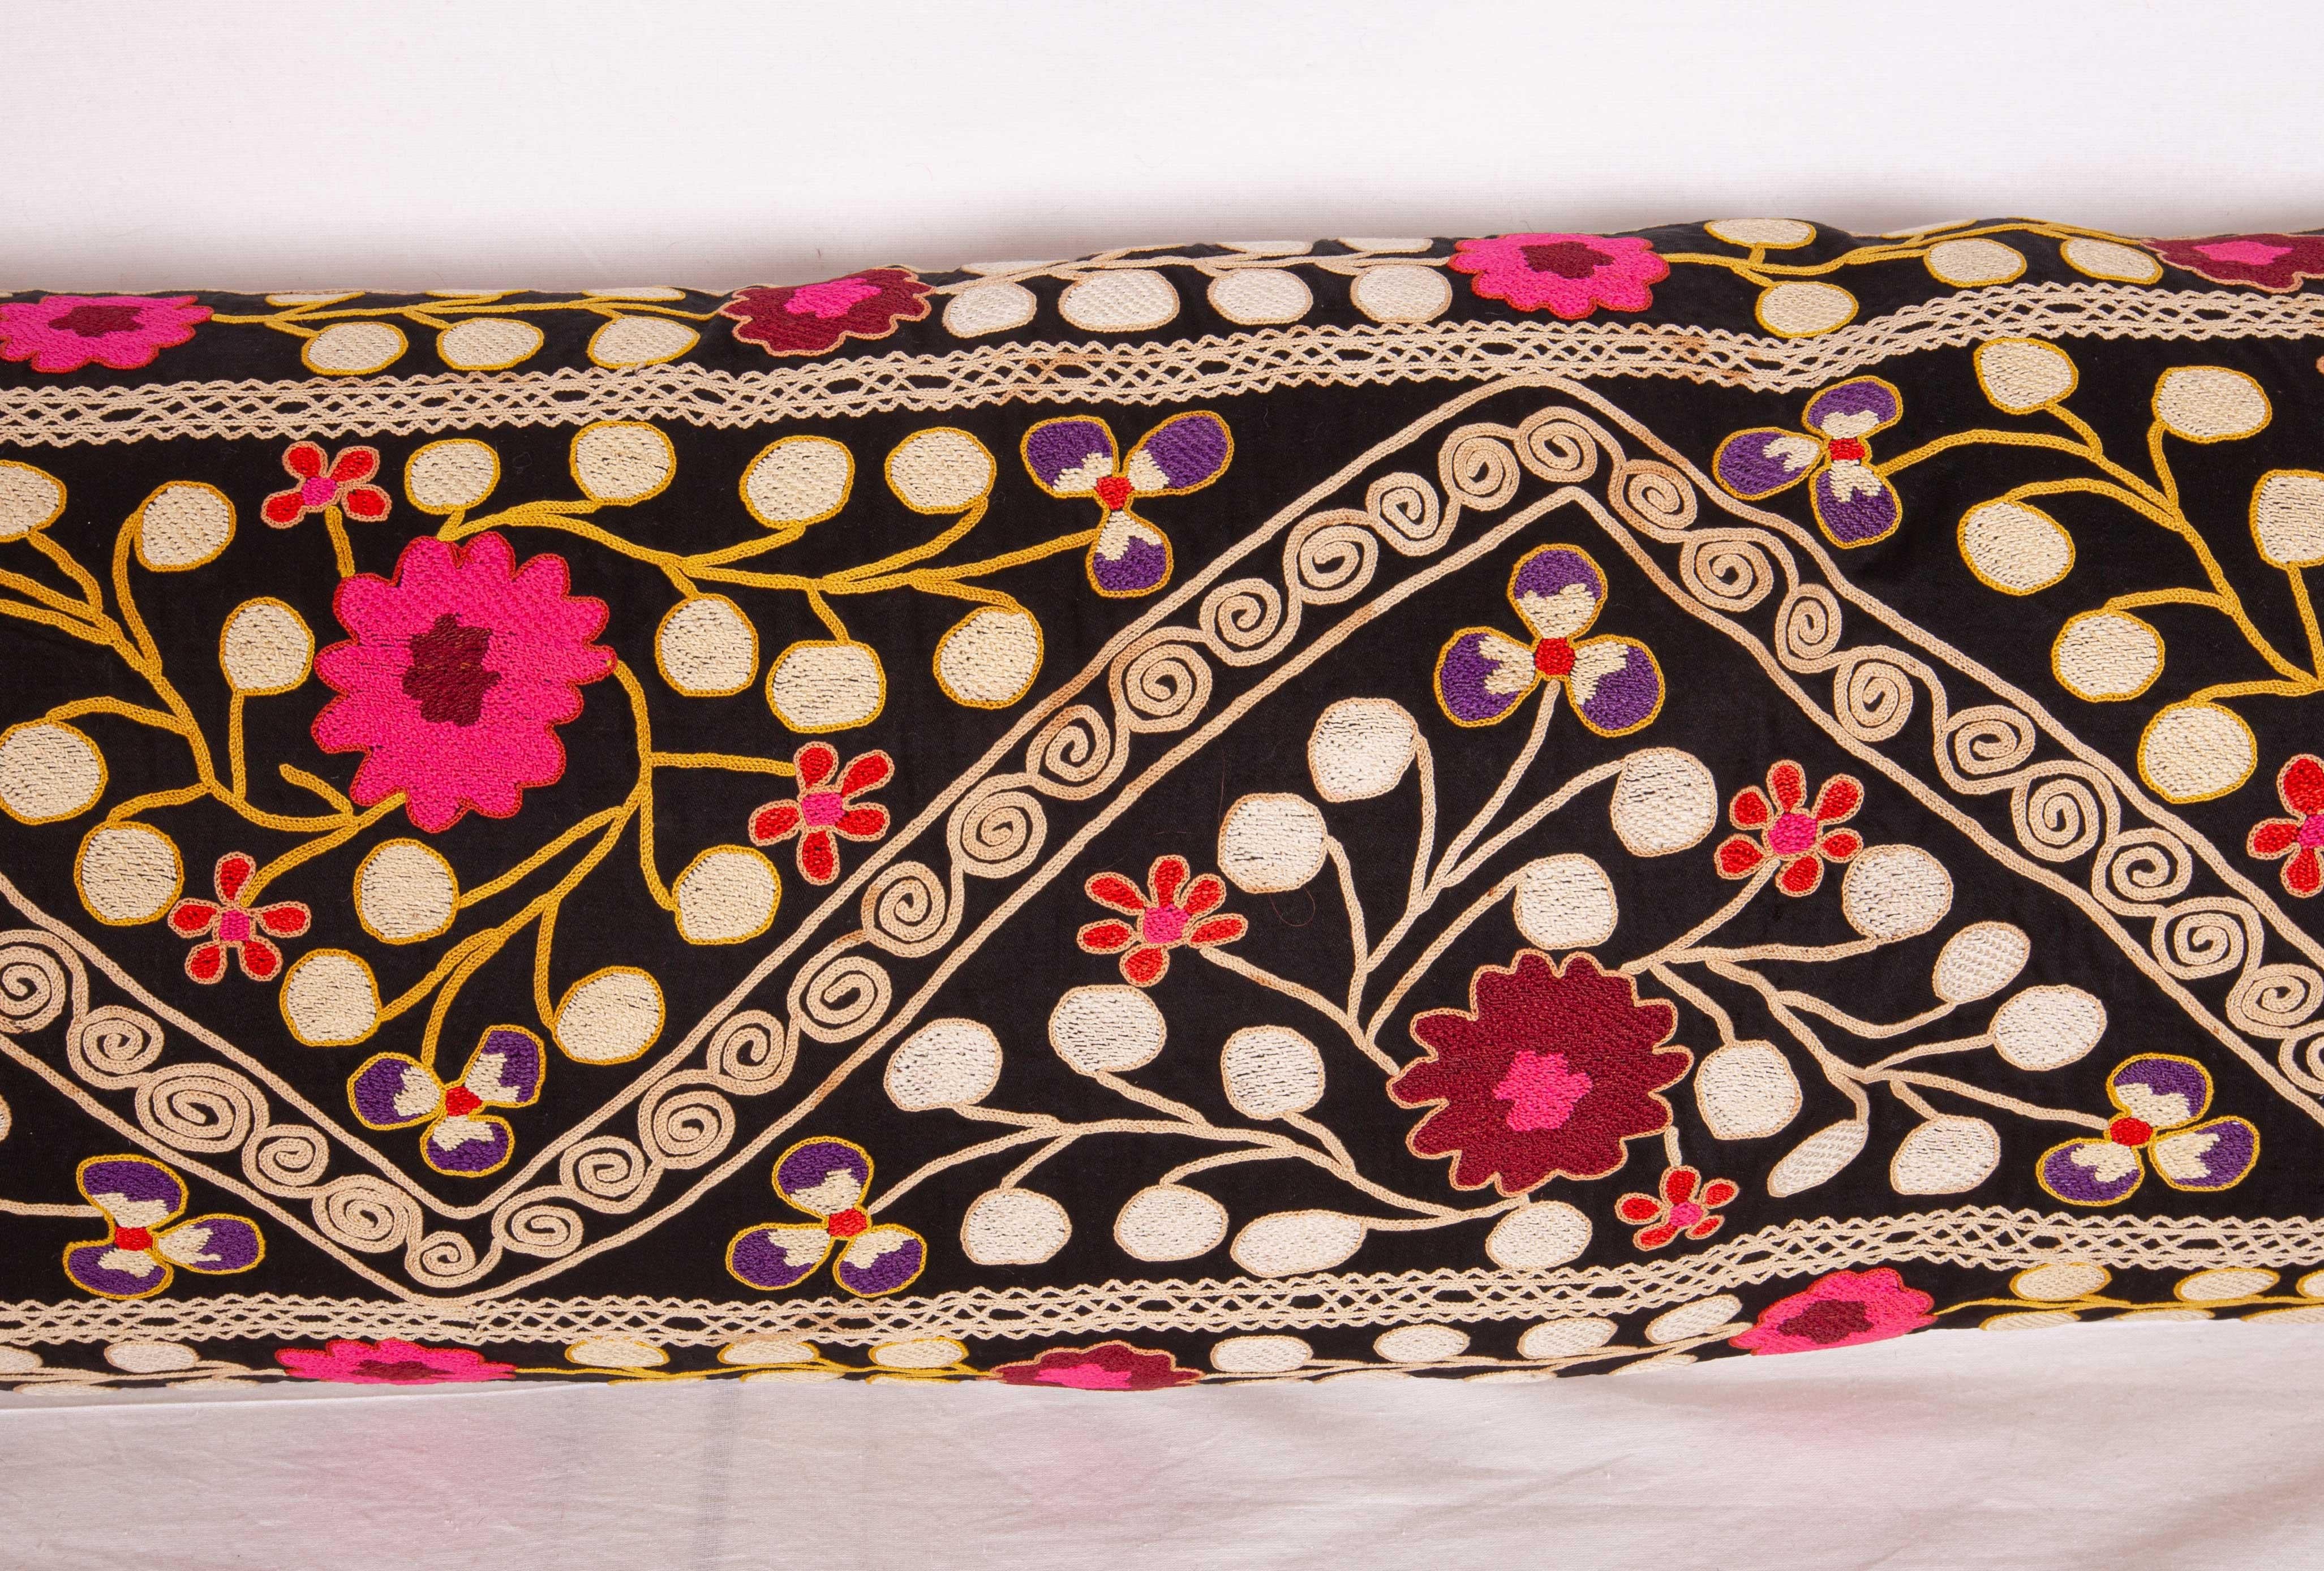 Embroidered Suzan Lumbar Pillow Case Fashioned from a Mid-20th Century Uzbek Suzani